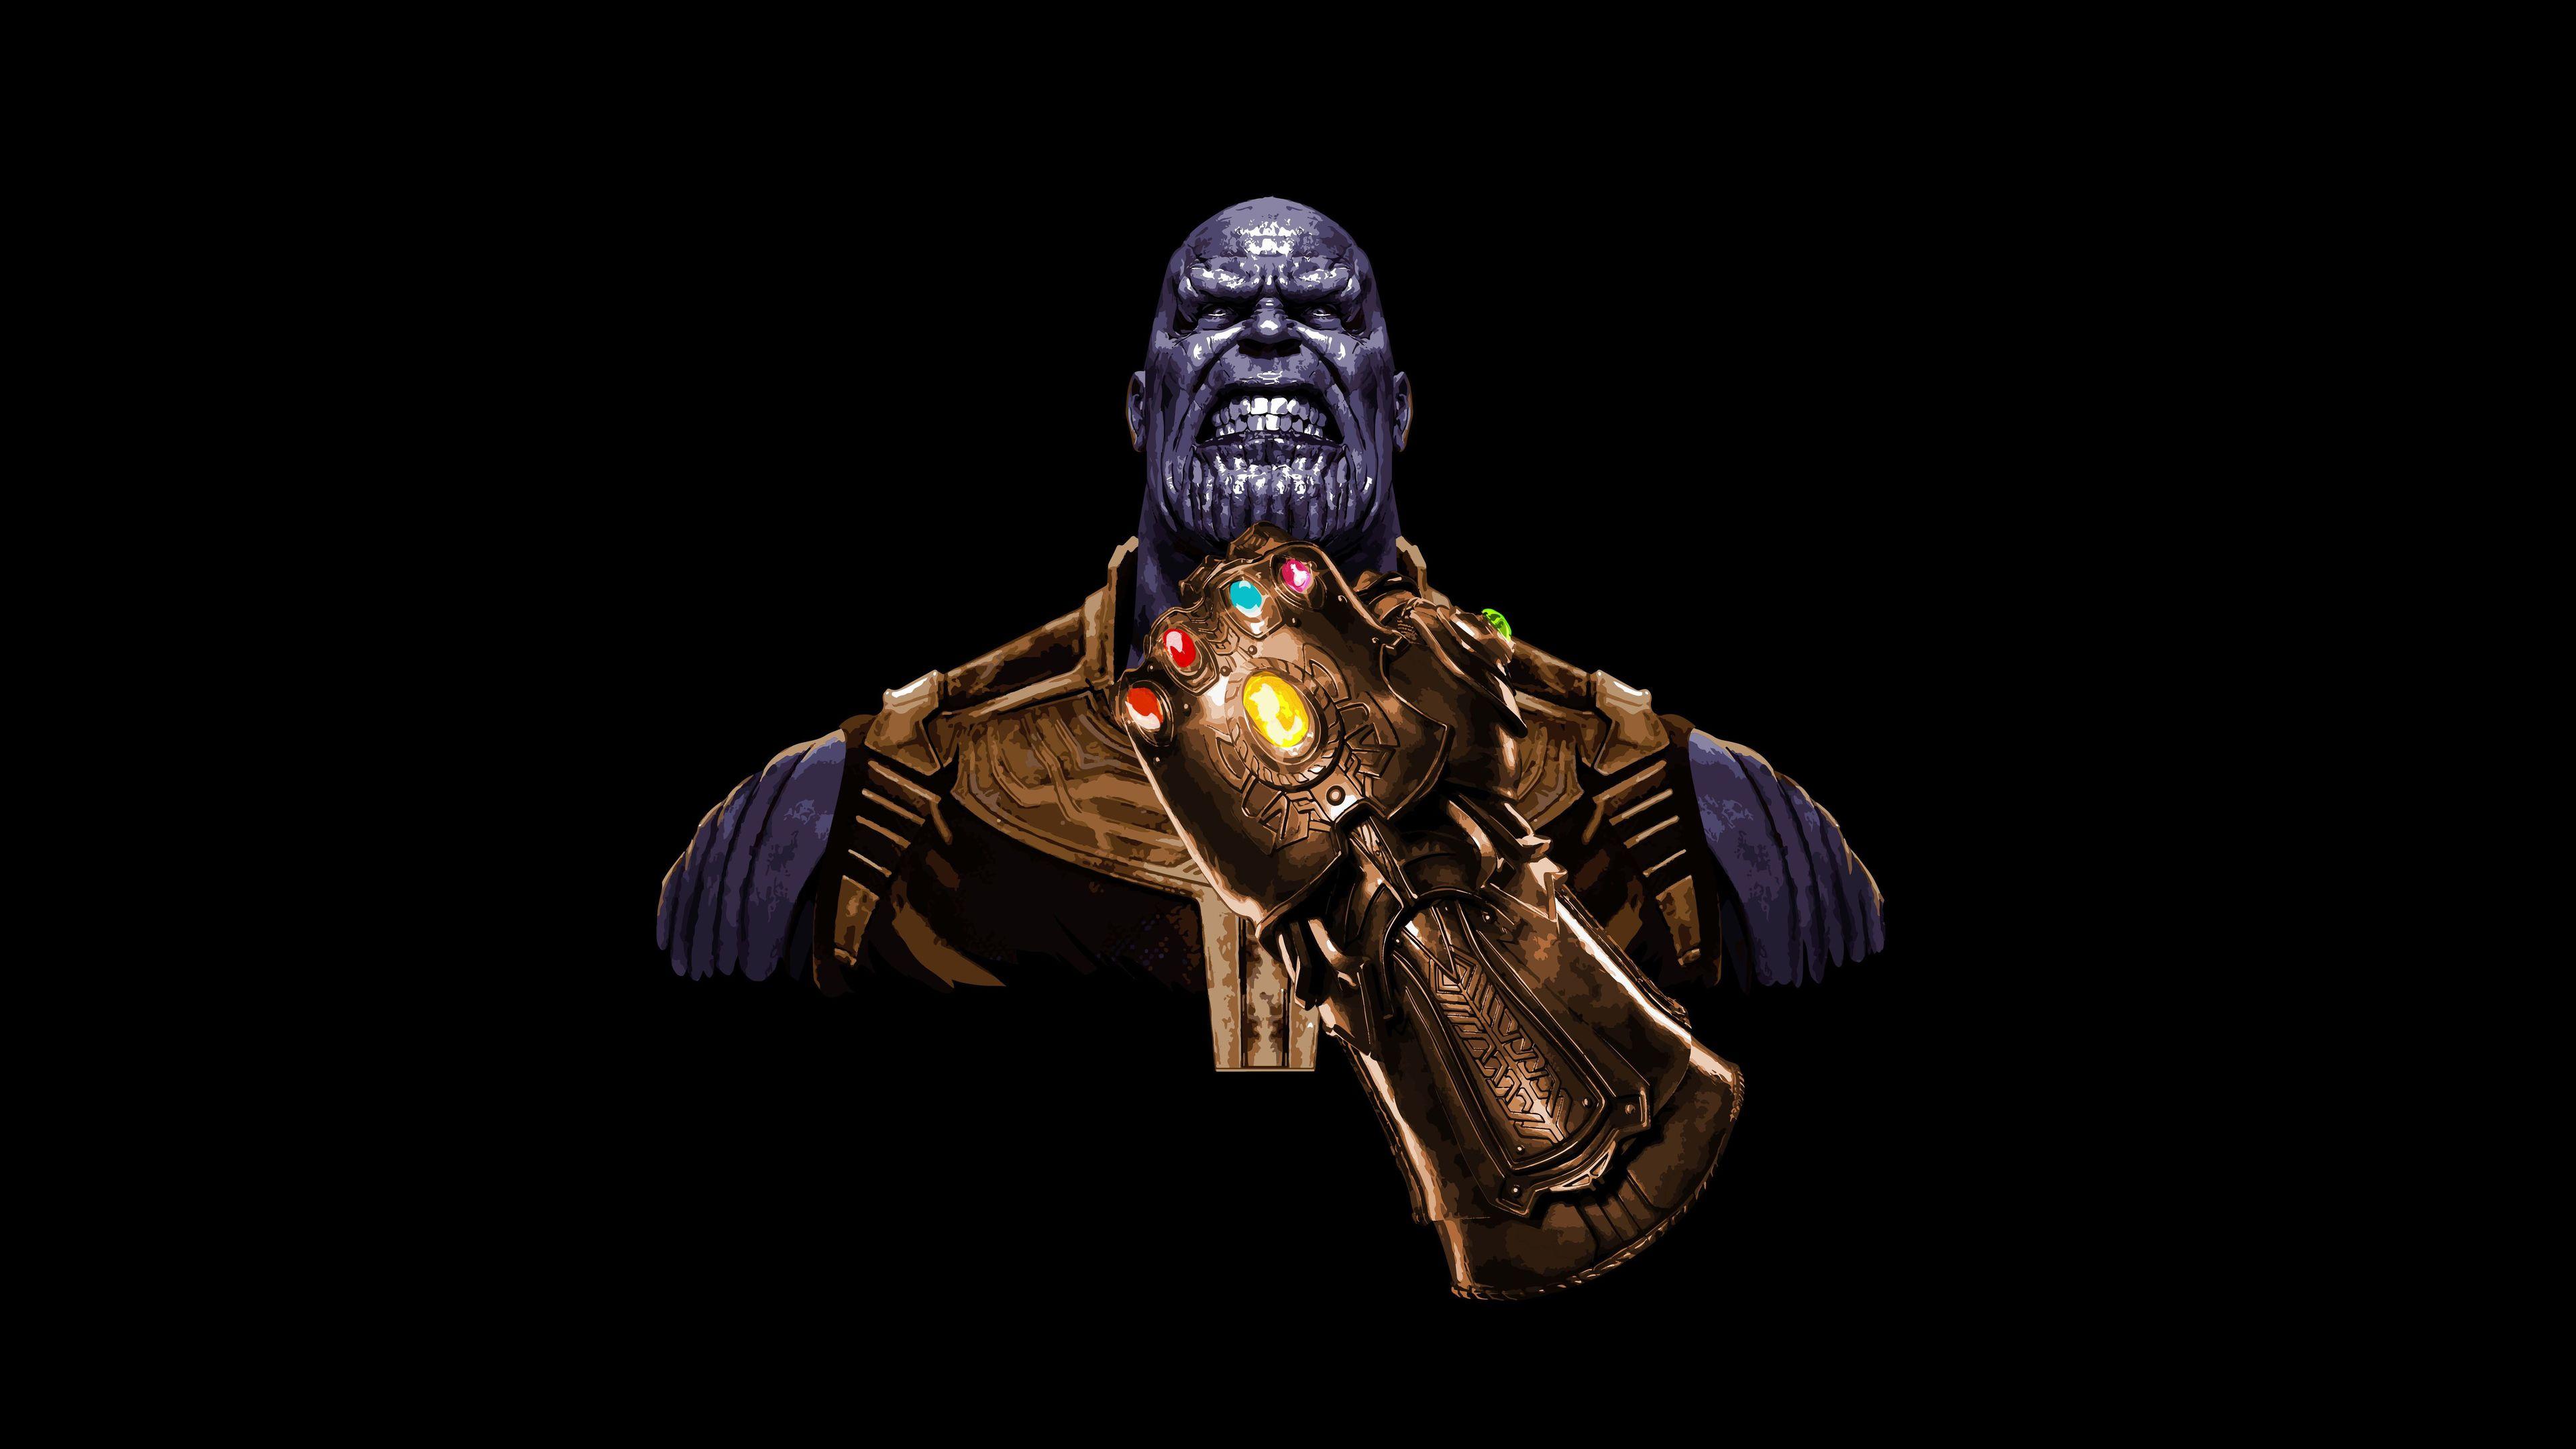 Thanos 1920X1080 Wallpapers